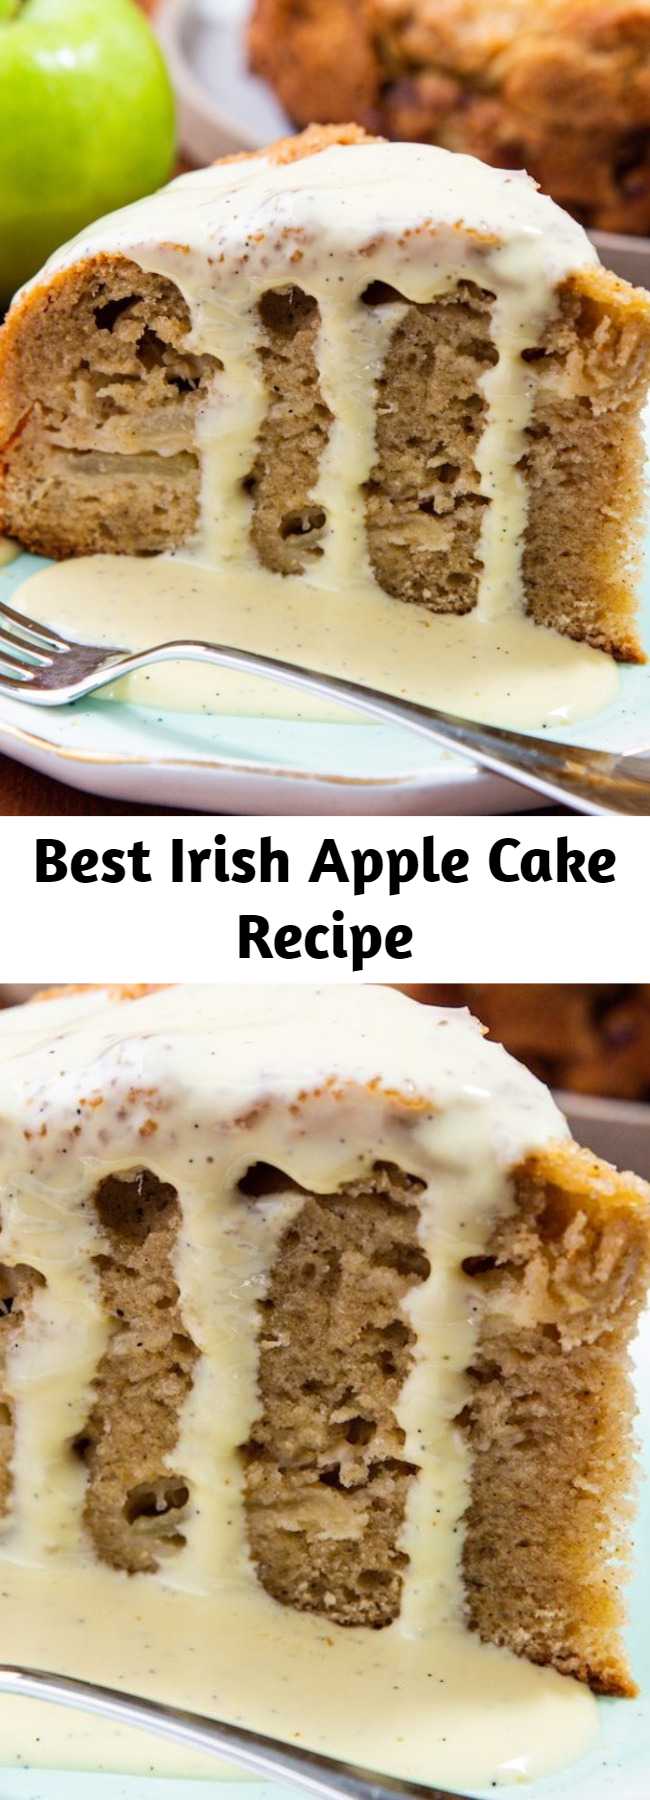 Best Irish Apple Cake Recipe - A classic cake boasting tons of apples, lots of warm spices, a crispy sugar topping, and a rich vanilla custard sauce. This tender cake is jam-packed with apples, which is why we think it's perfectly appropriate to eat a slice for breakfast. 😉